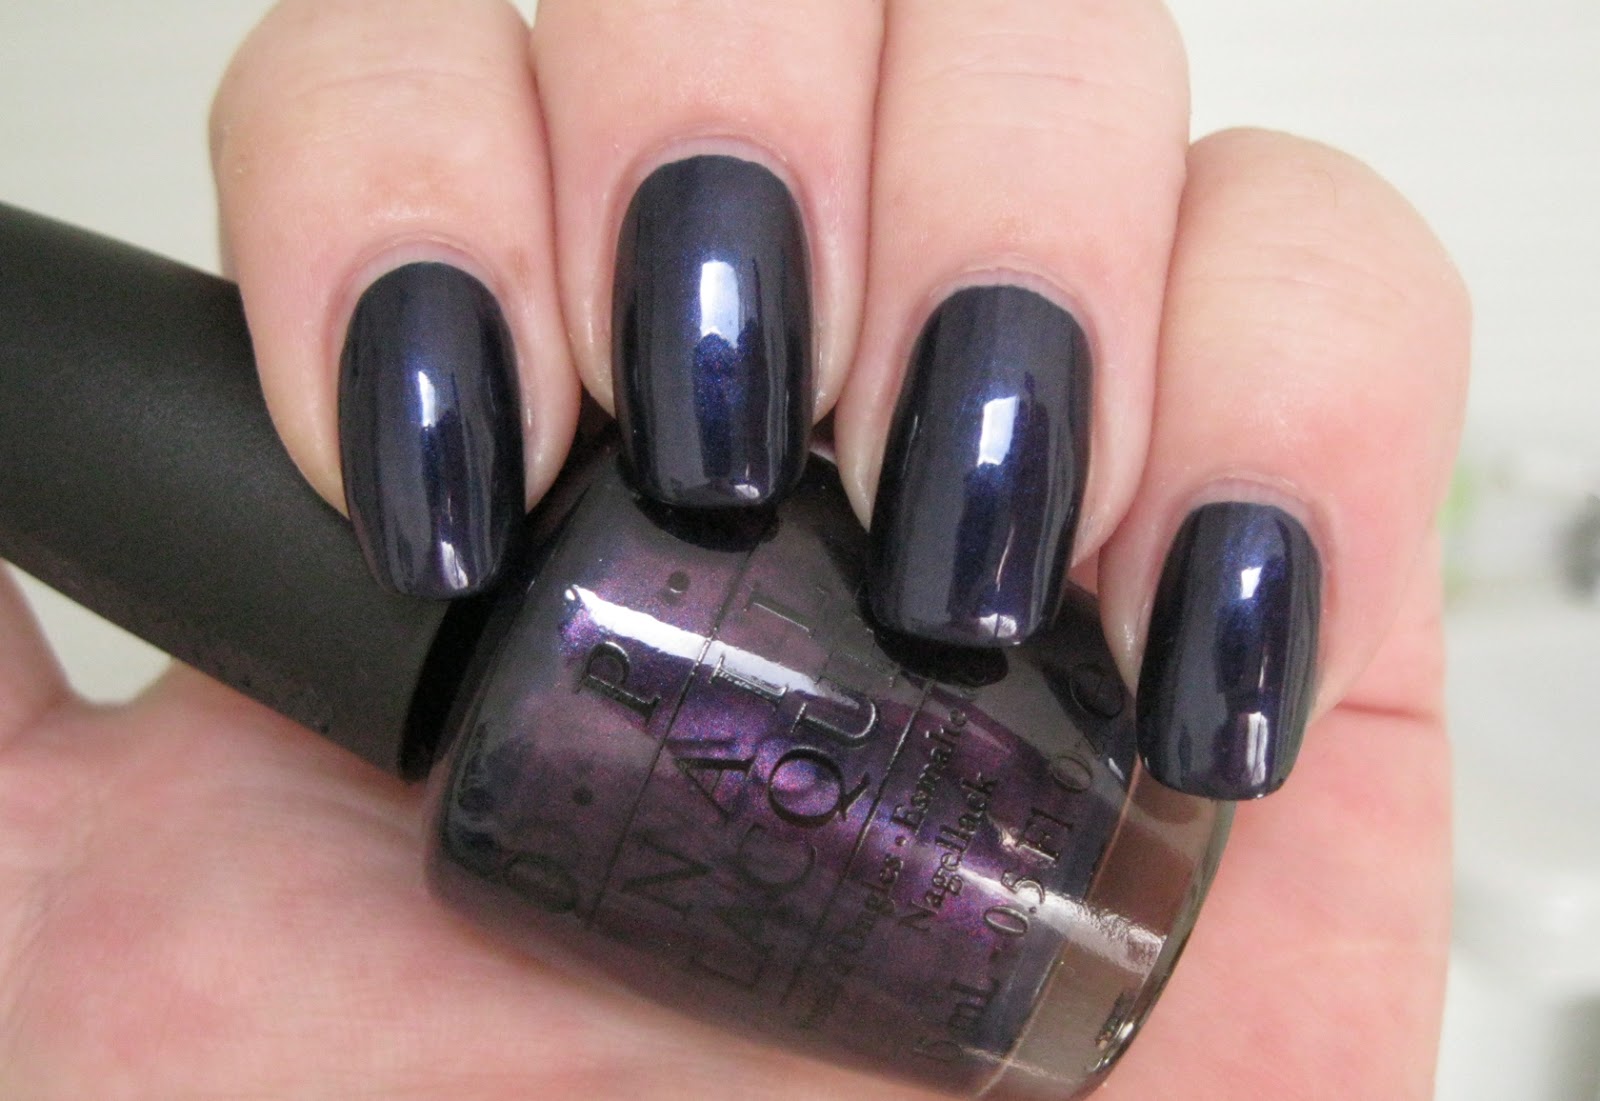 OPI Nail Lacquer in "Russian Navy" - wide 5